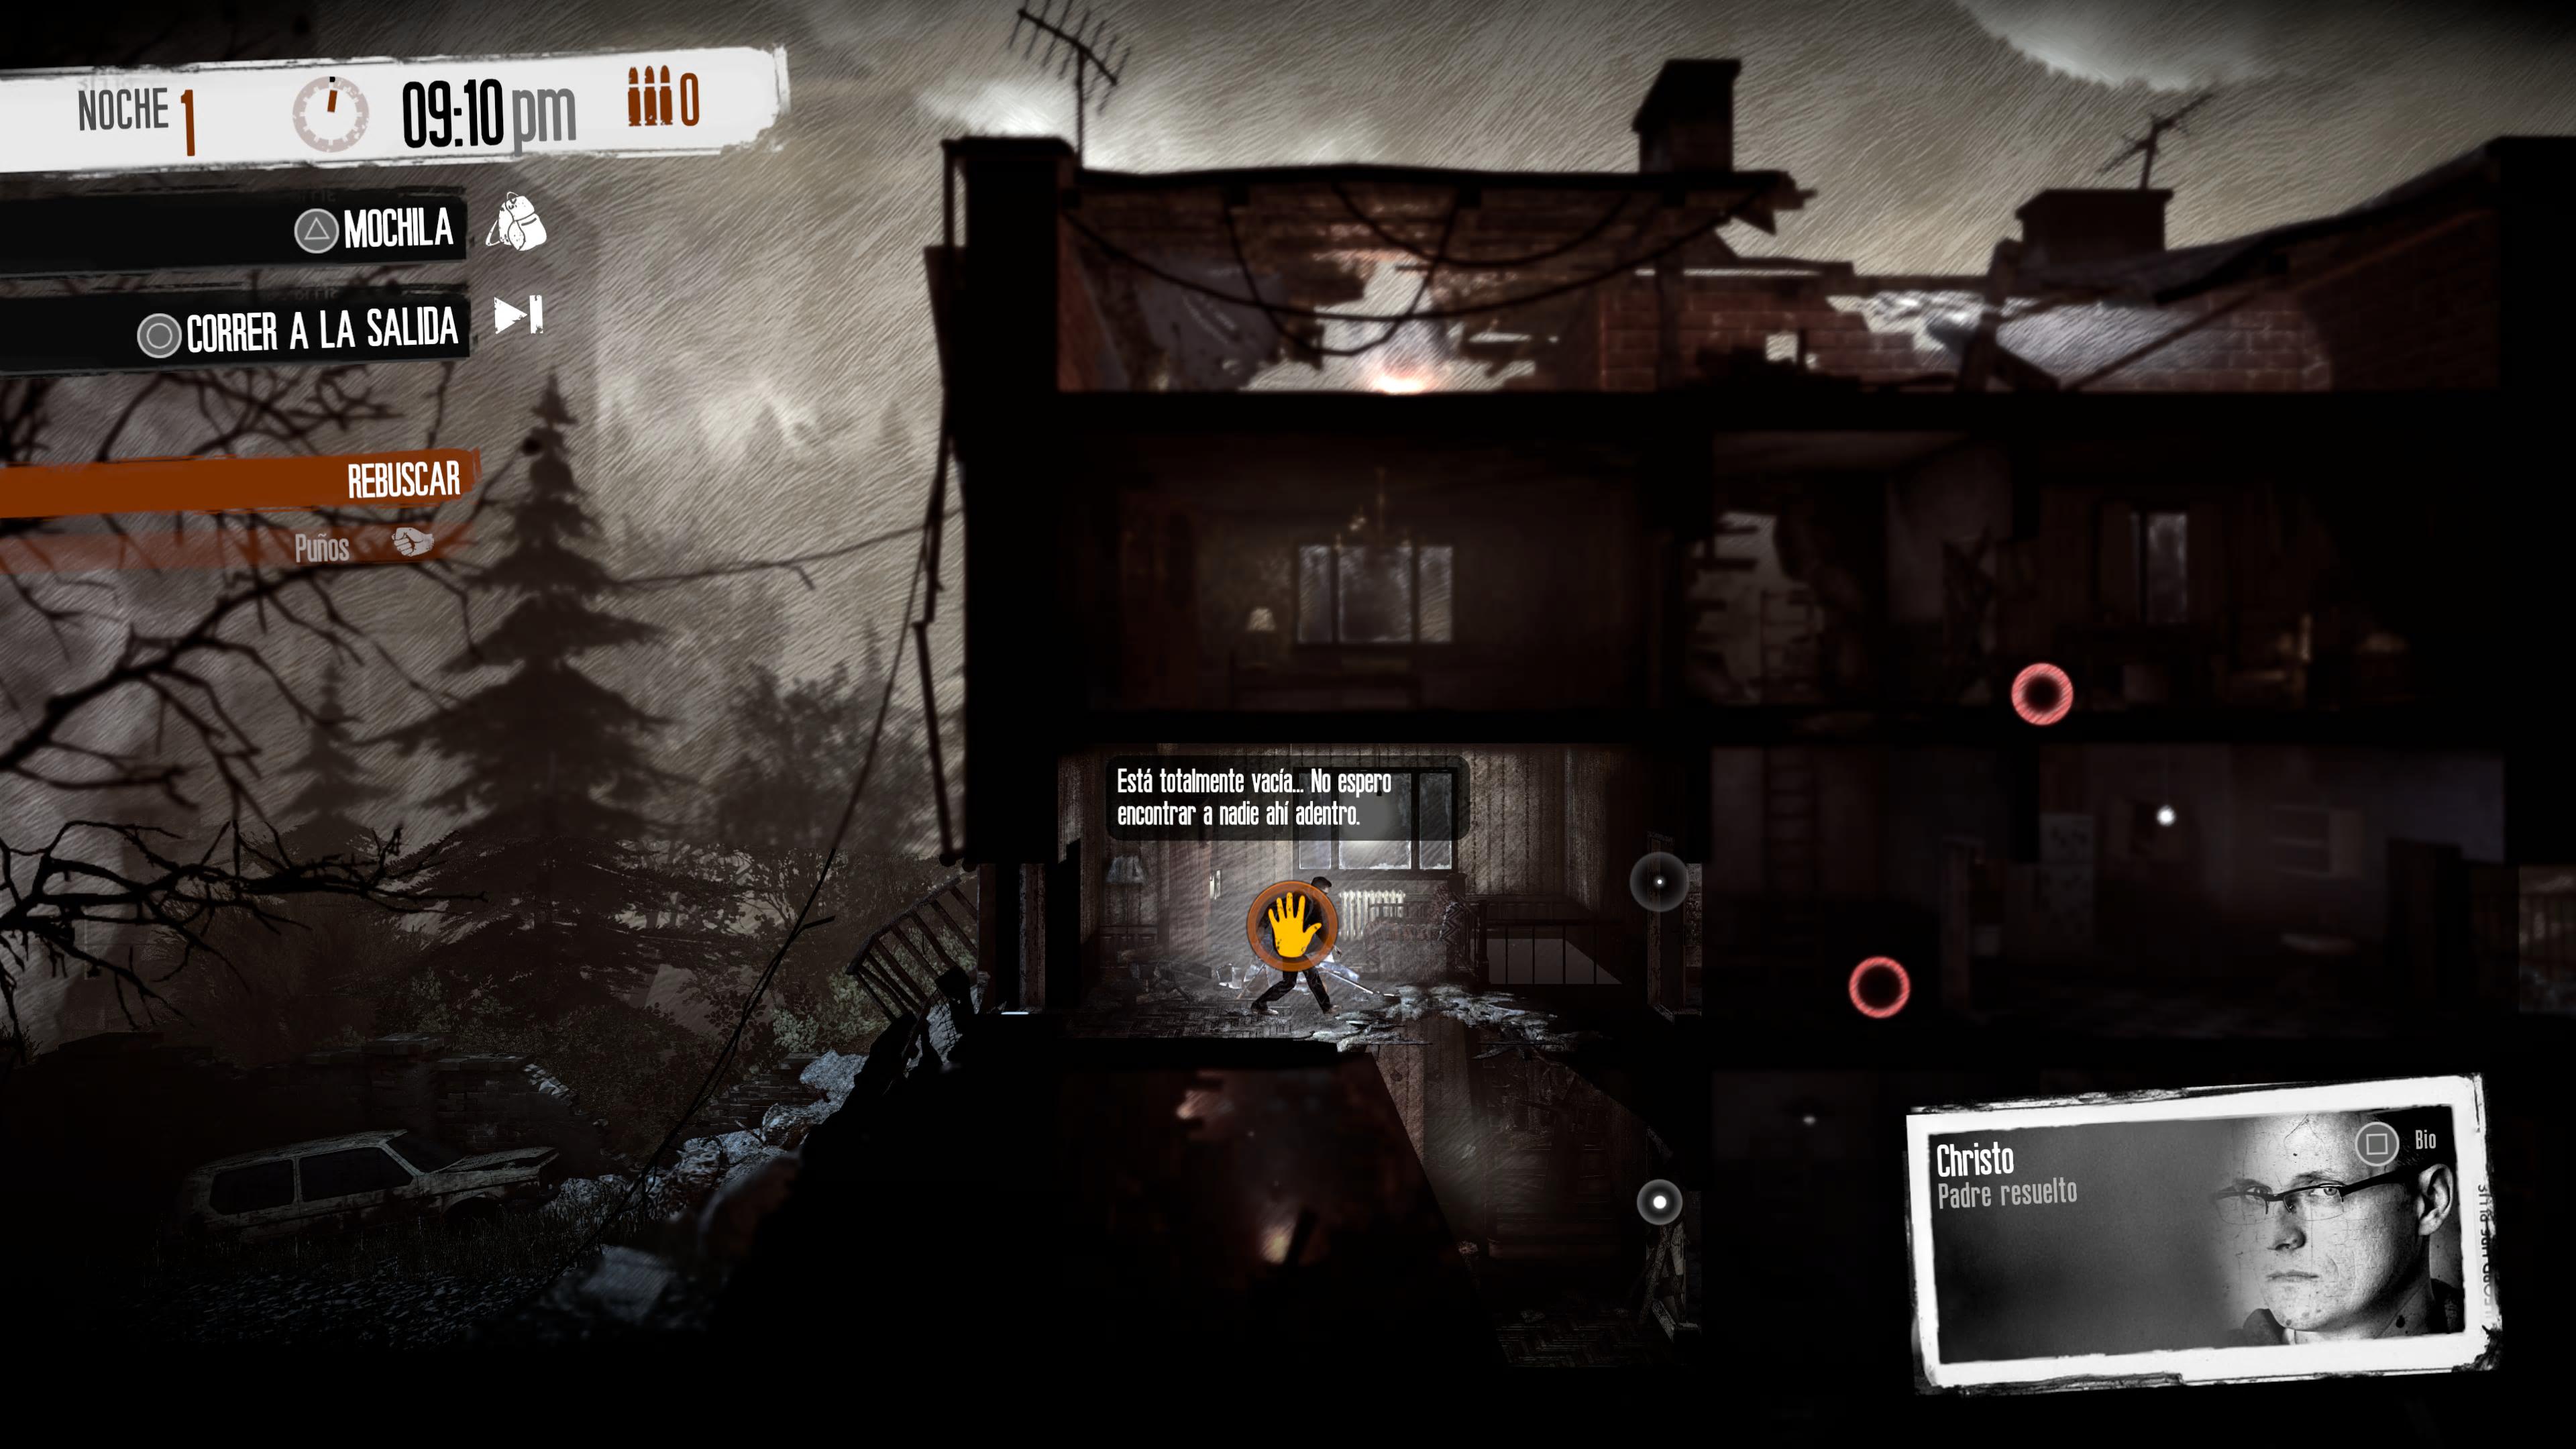 This War of Mine Final Cut Review